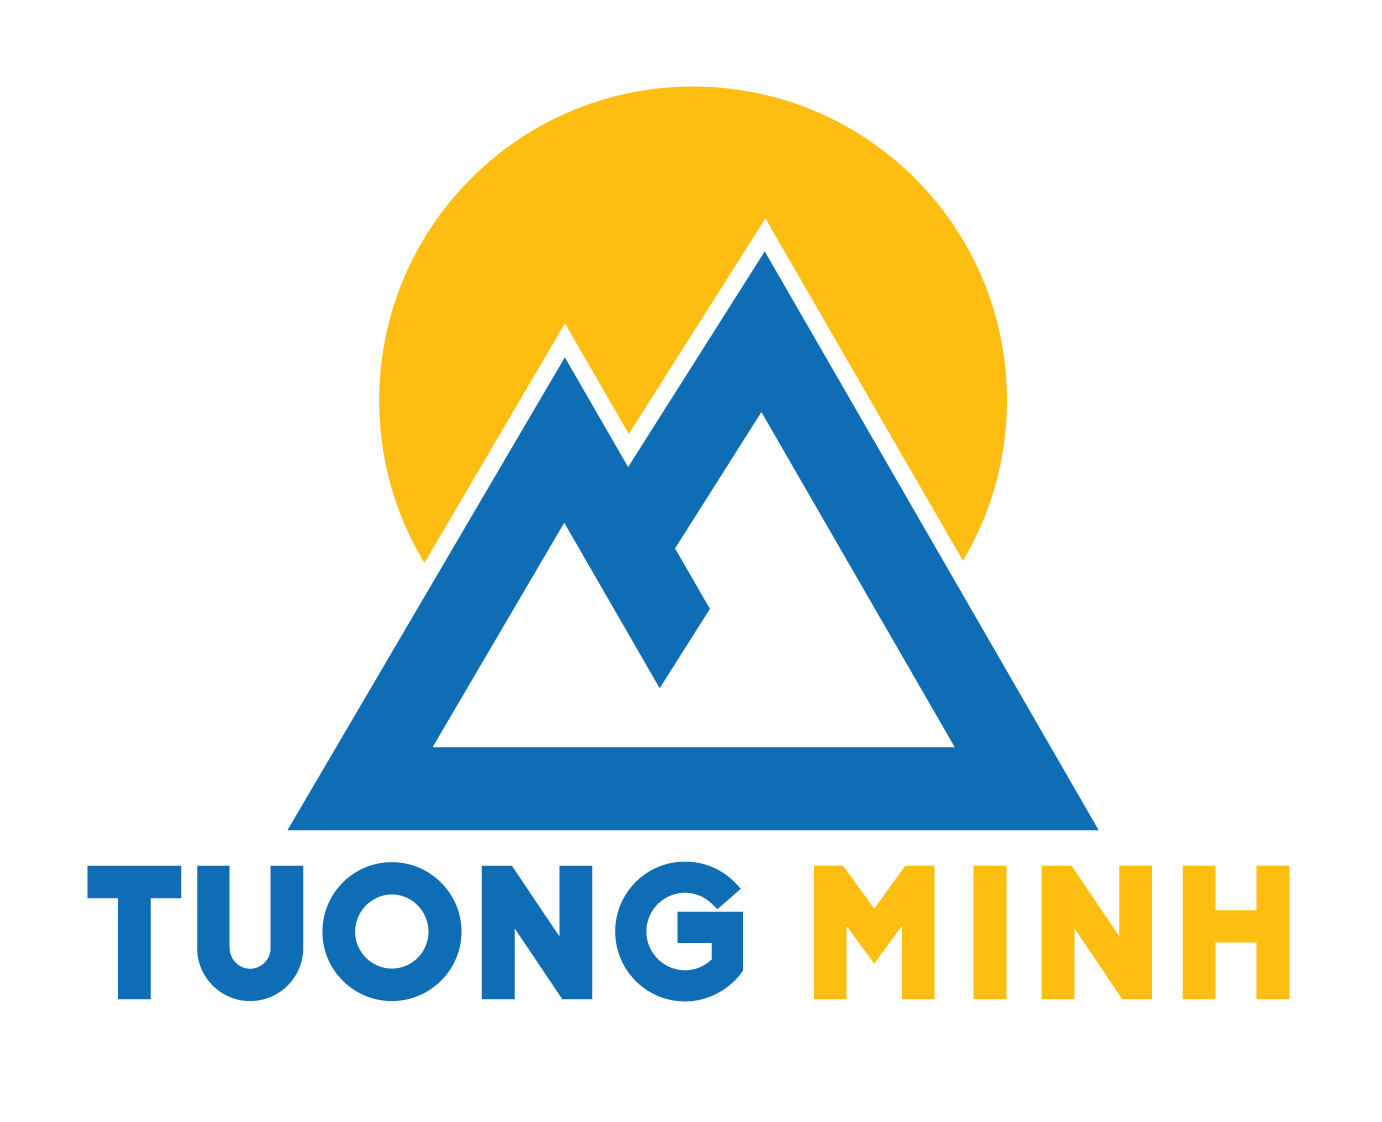 TUONG MINH INTRODUCTION